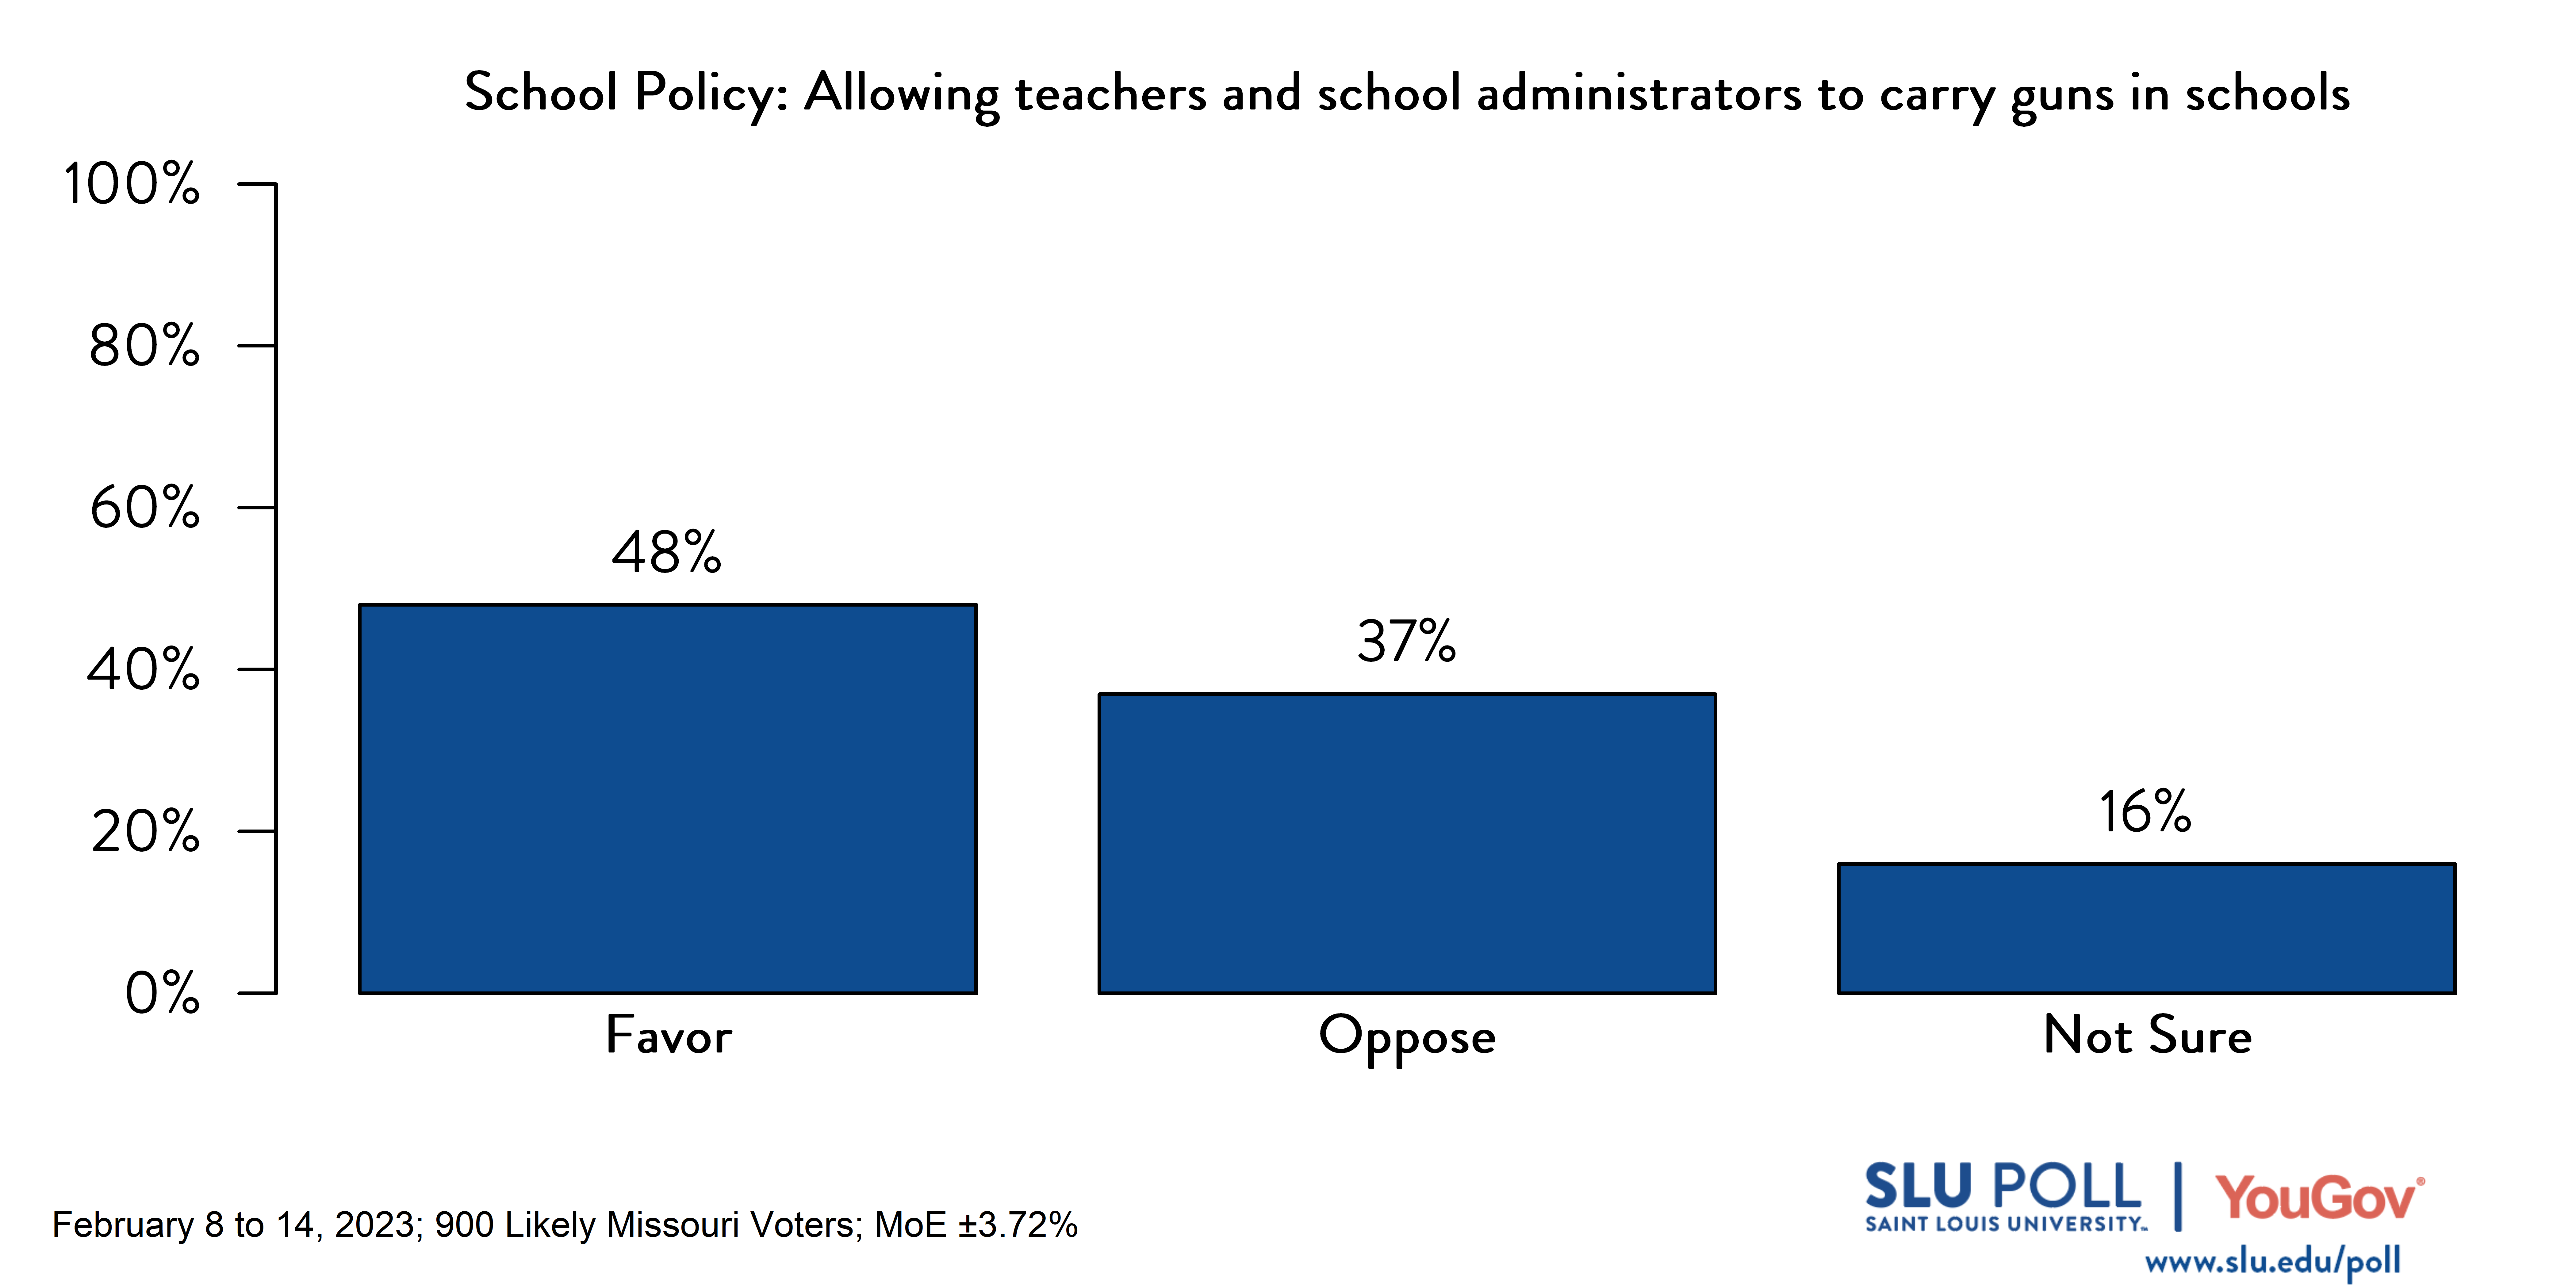 Likely voters' responses to 'Do you favor or oppose the following policies in schools: Allowing teachers and school administrators to carry guns in schools?': 48% Favor, 37% Oppose, and 16% Not sure.